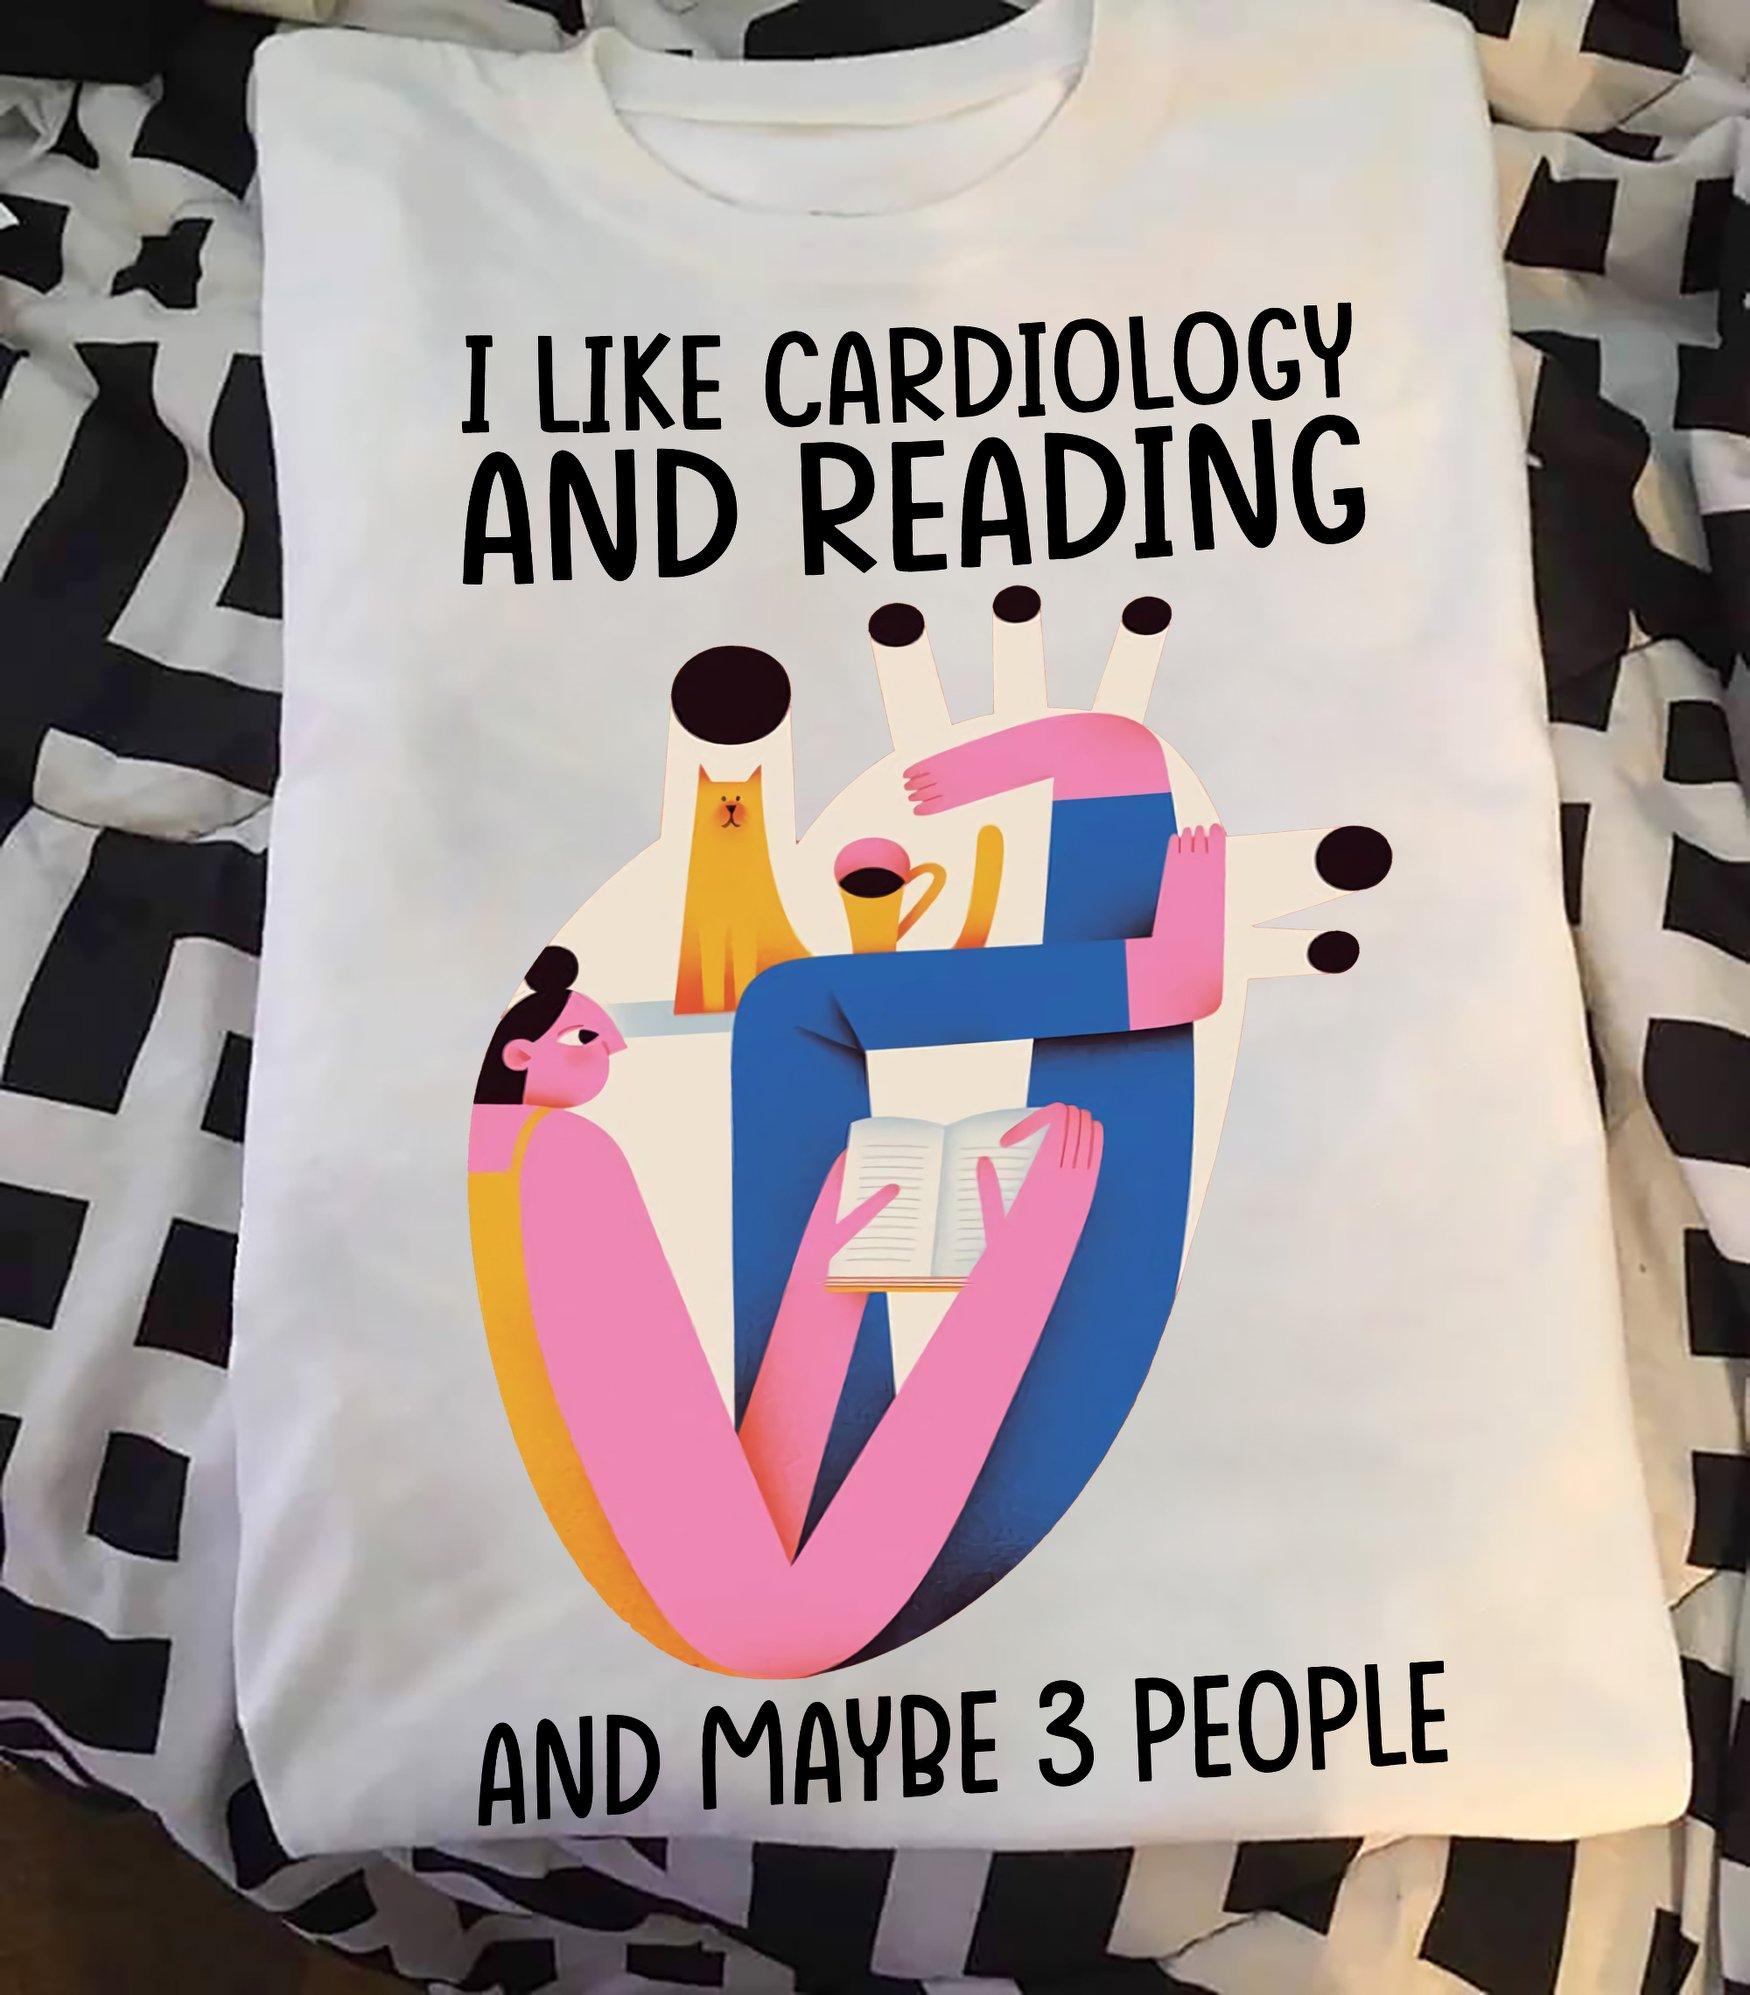 Cardiology Book - I like cardiology and reading and maybe 3 people